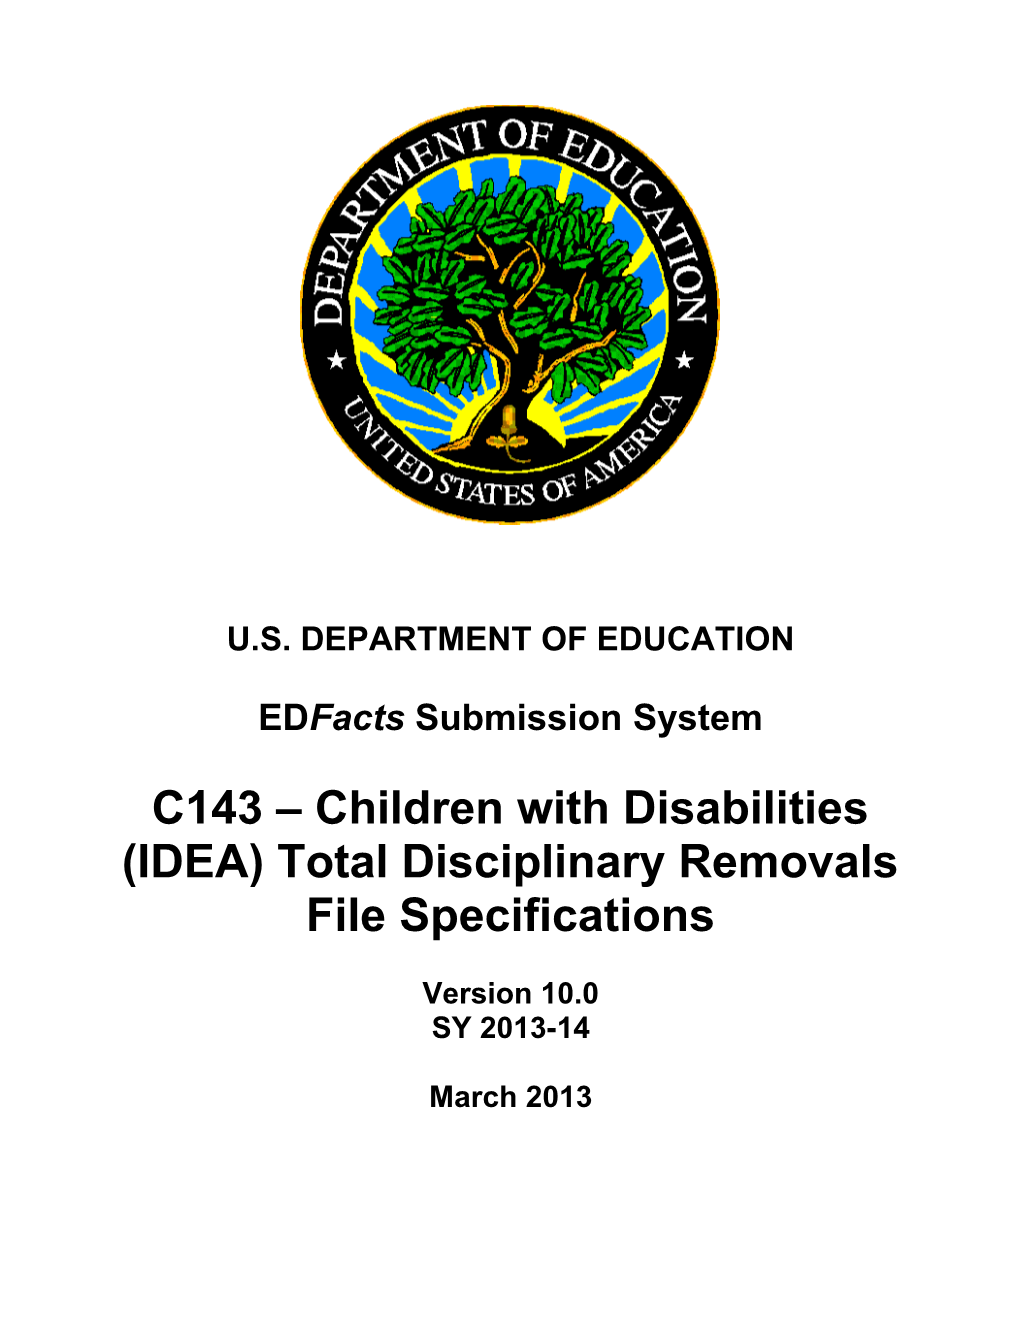 Children with Disabilities (IDEA) Total Disciplinary Removals File Specifications